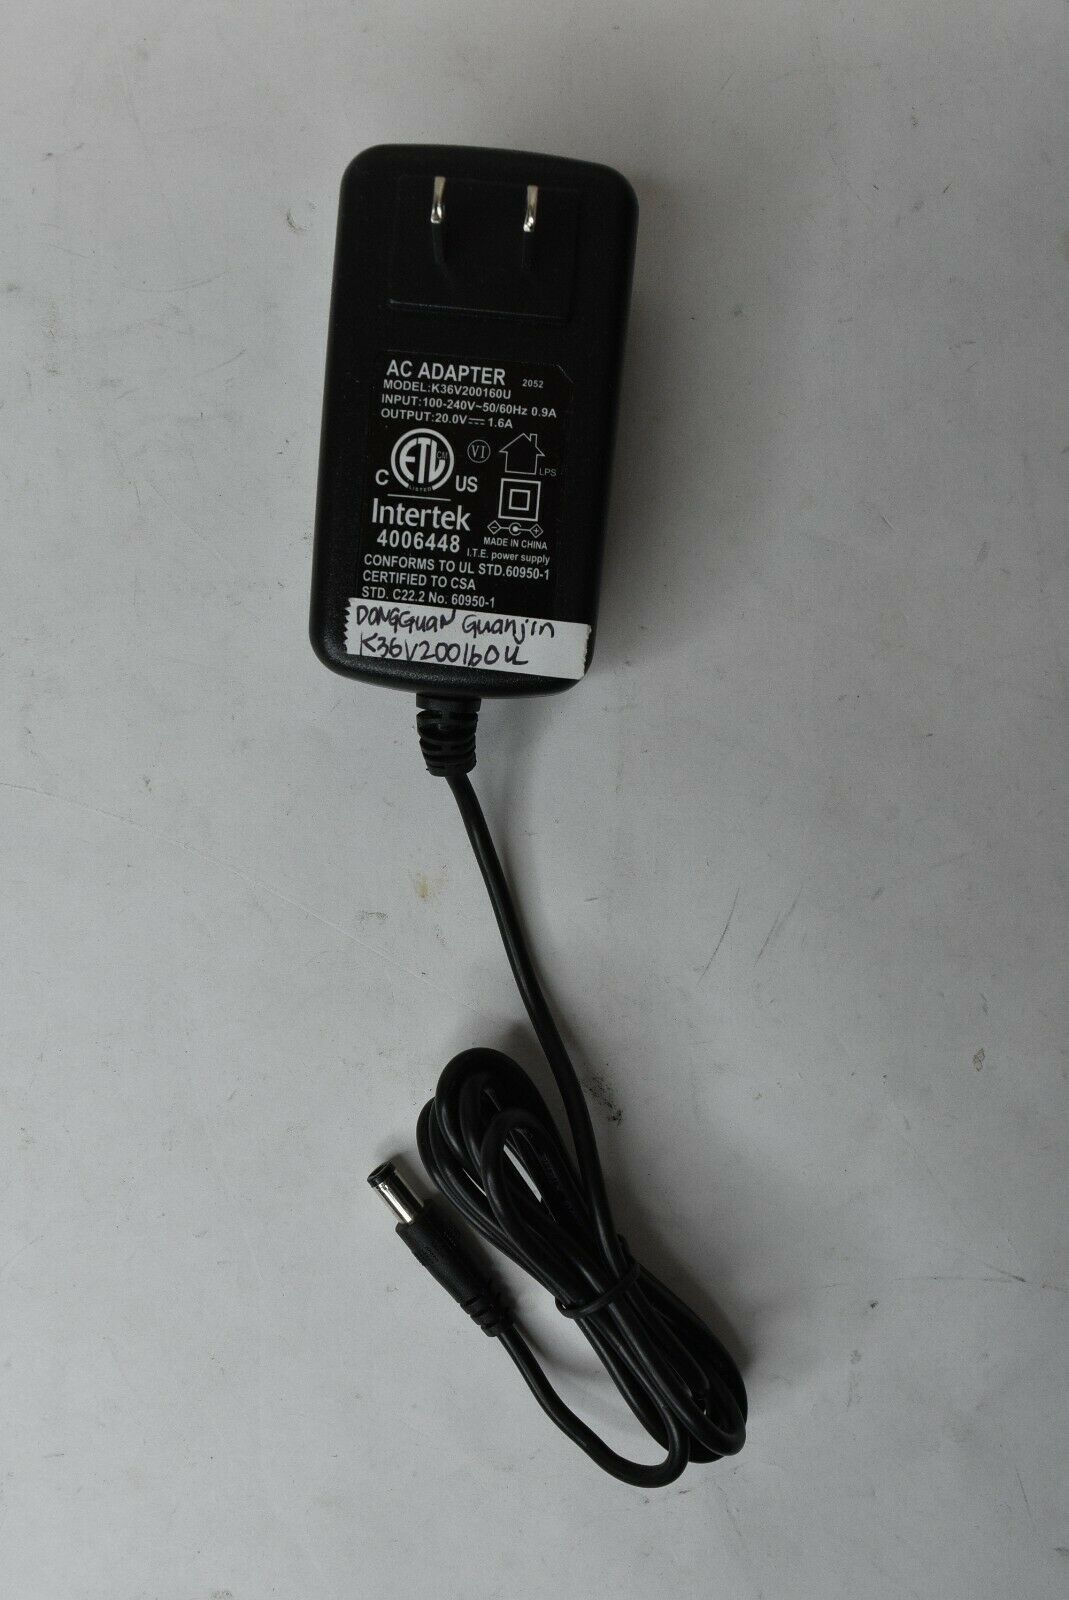 Dongguan Guanjin AC Adapter Power Supply Unit K36V200160U 20V 1.6A Features: Powered Output Voltage: 20 V Brand: - Click Image to Close